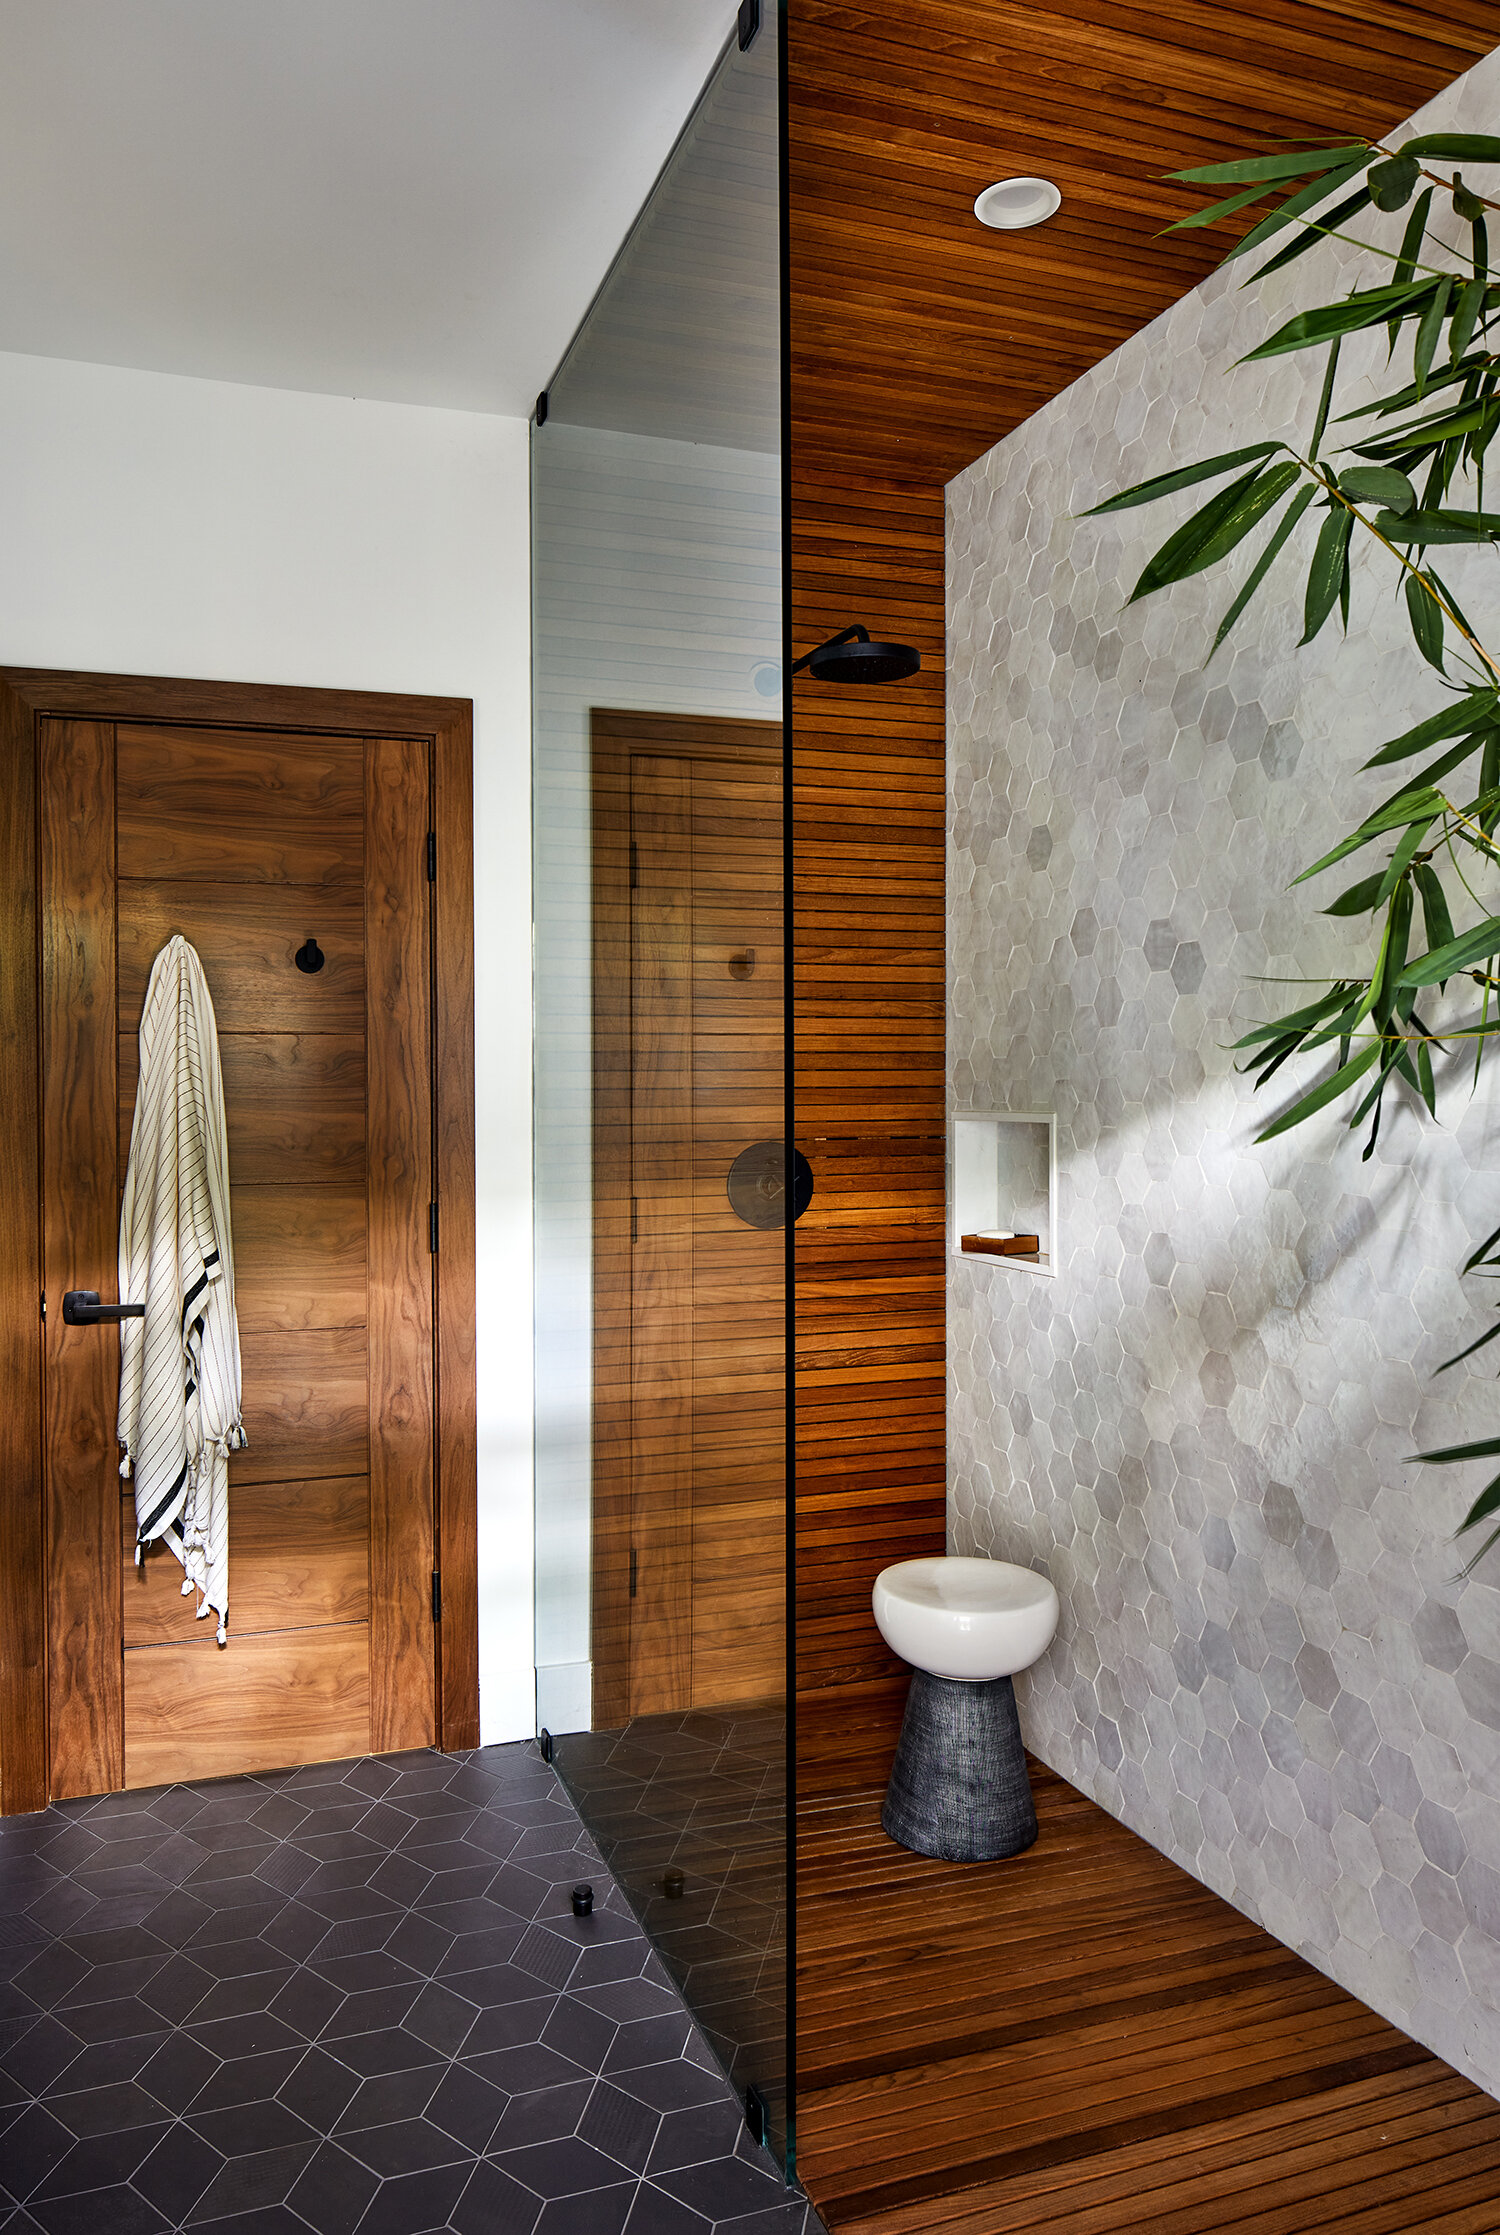 Elevate Your Home with Innovative Bathroom Design | Breeze Giannasio